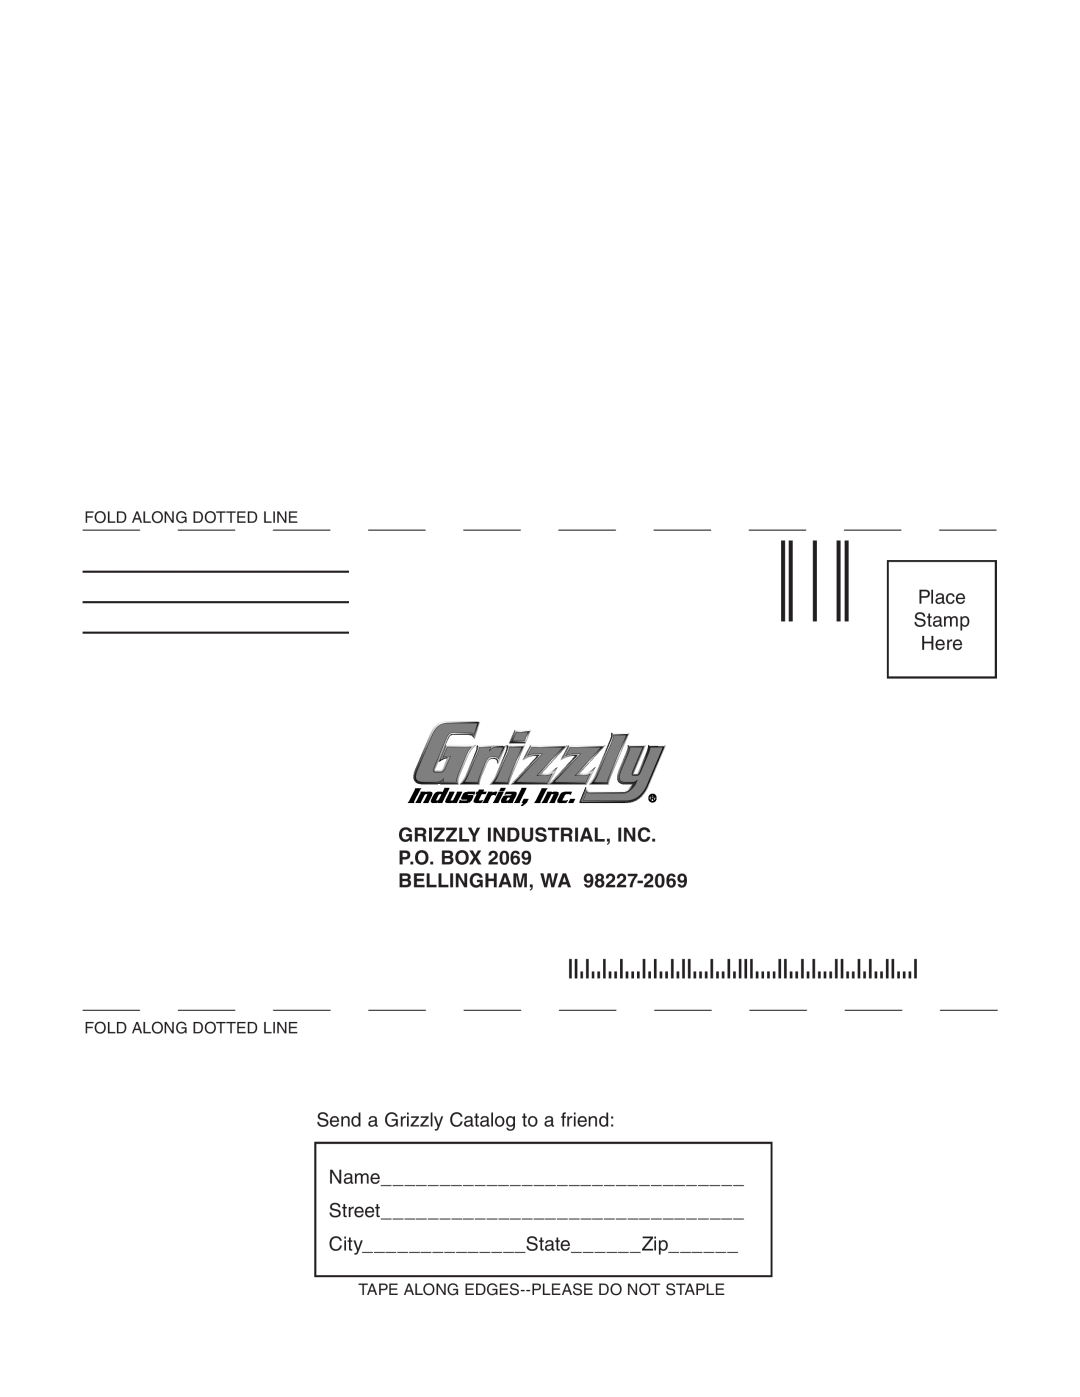 Grizzly G9017/G9018 manual Grizzly Industrial, Inc P.O. Box Bellingham, Wa, Place Stamp Here 